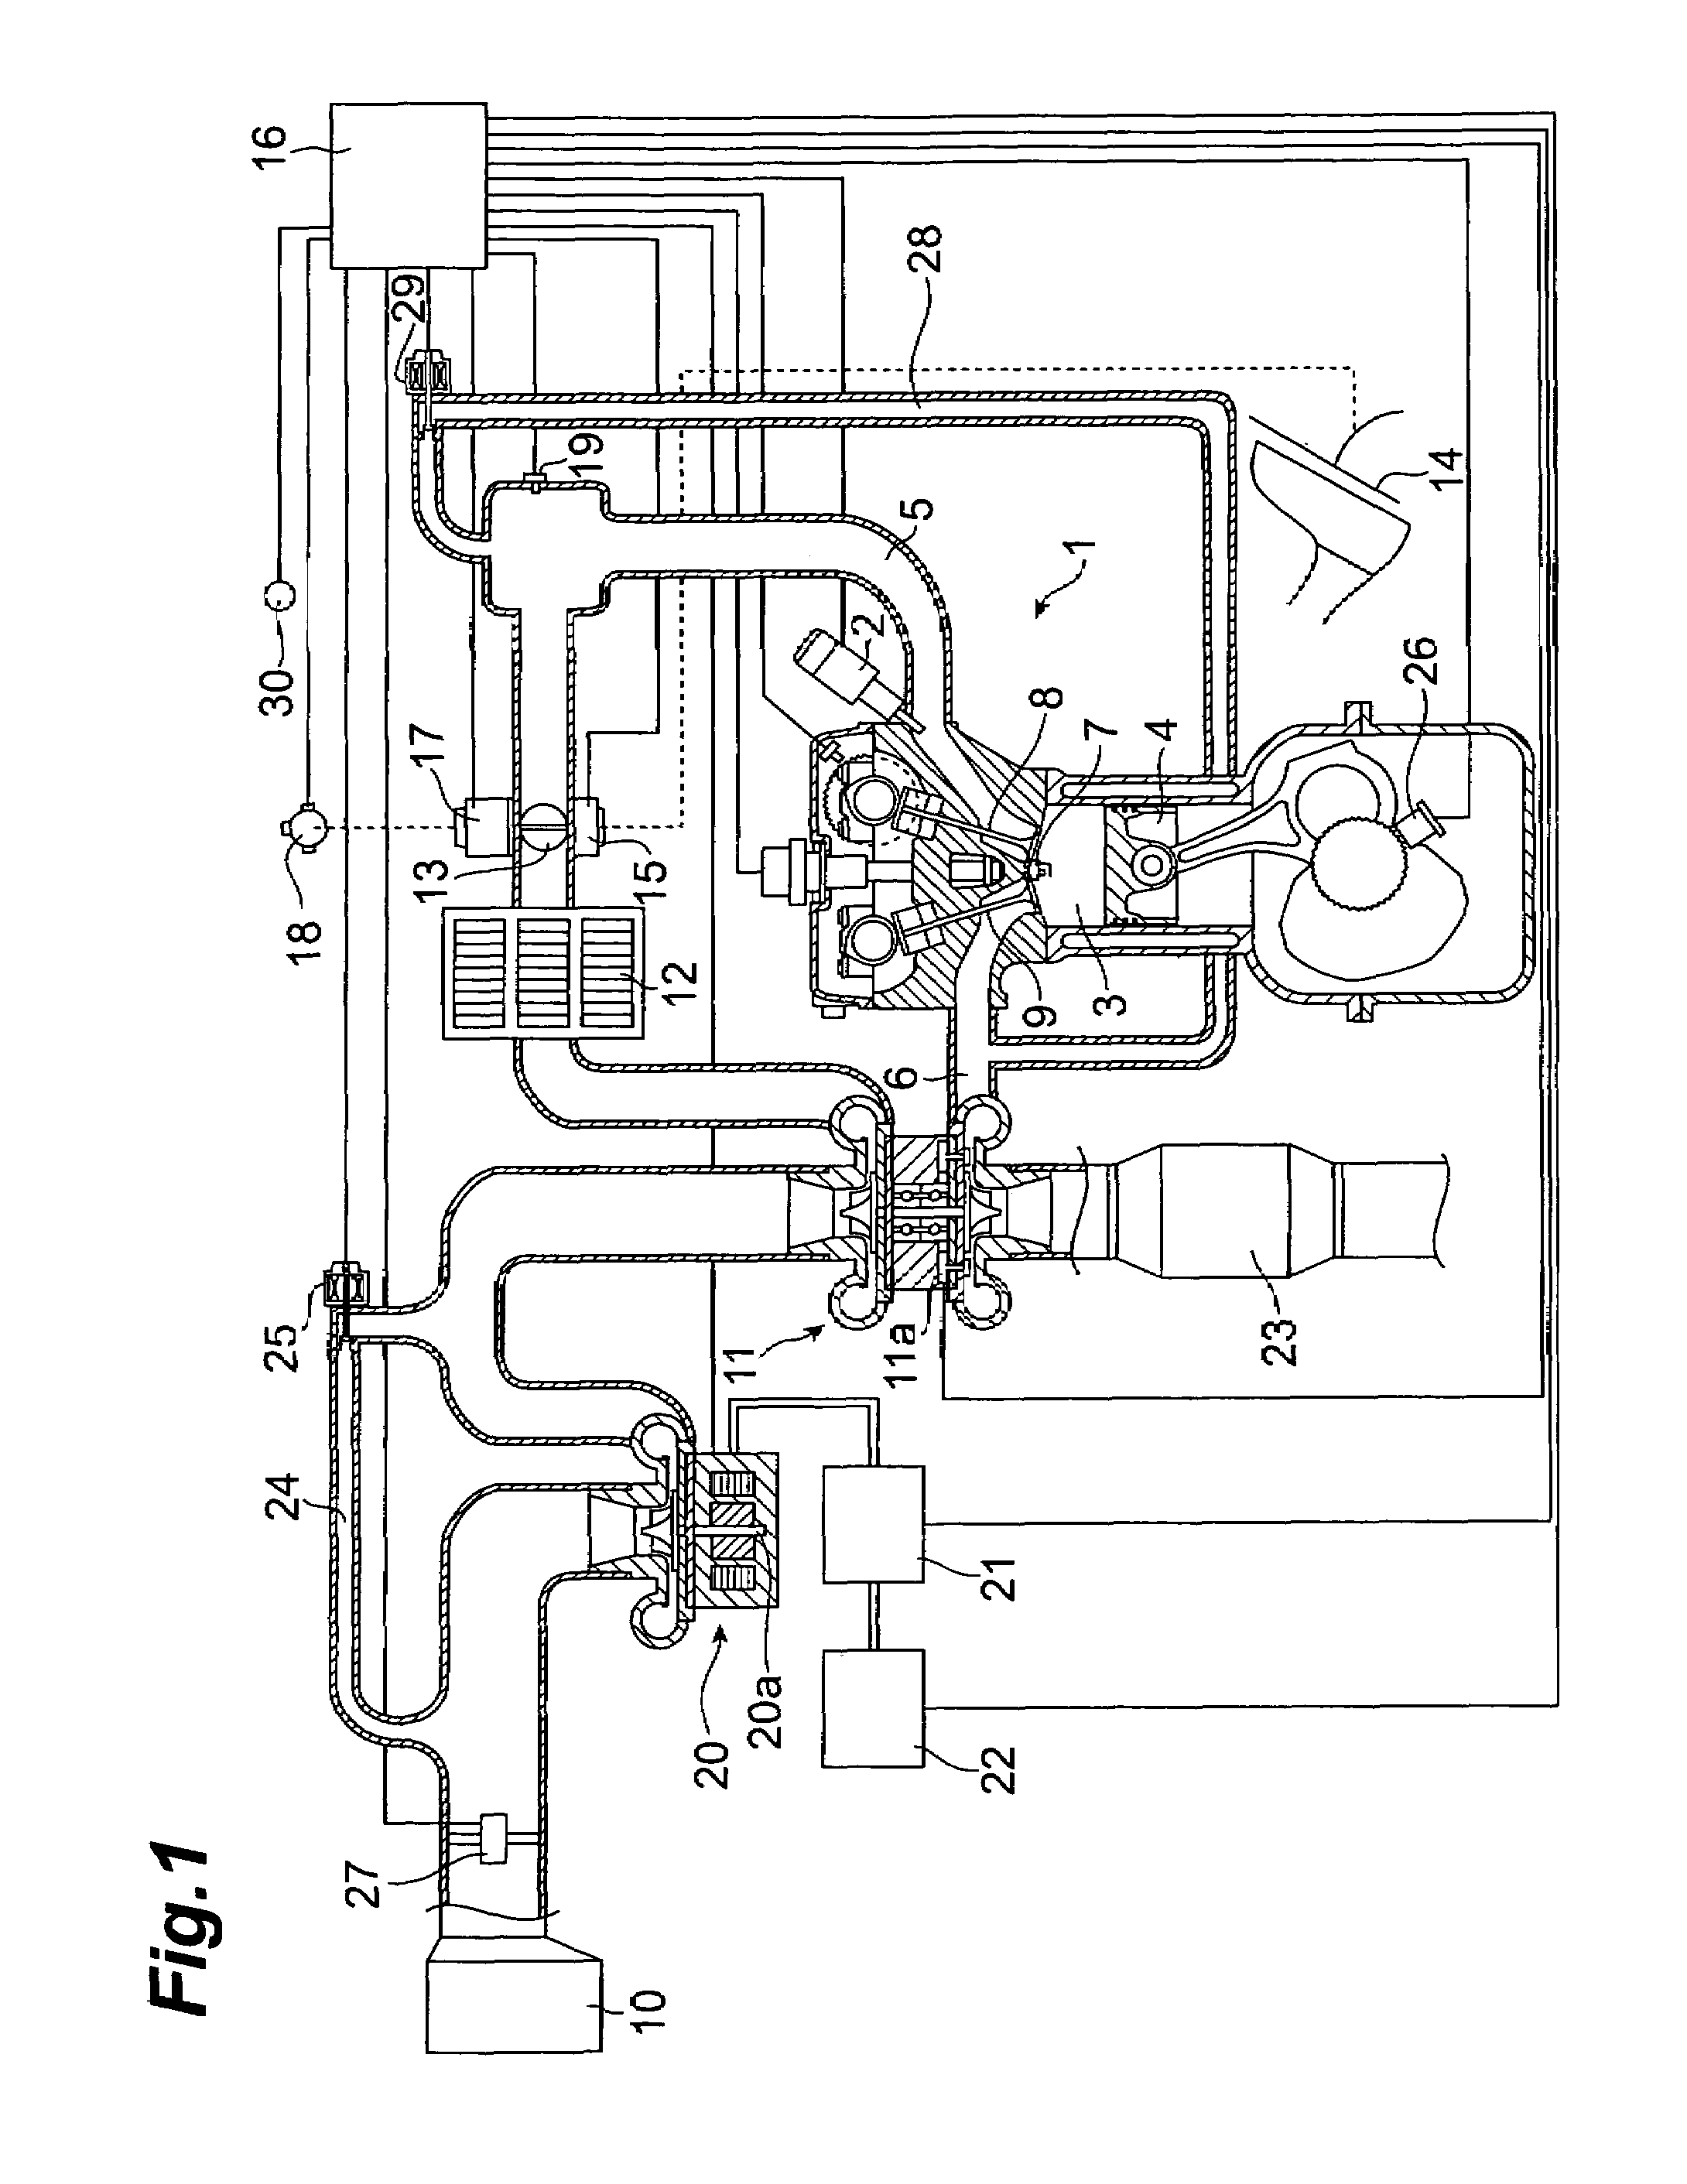 Control device for supercharger with electric motor